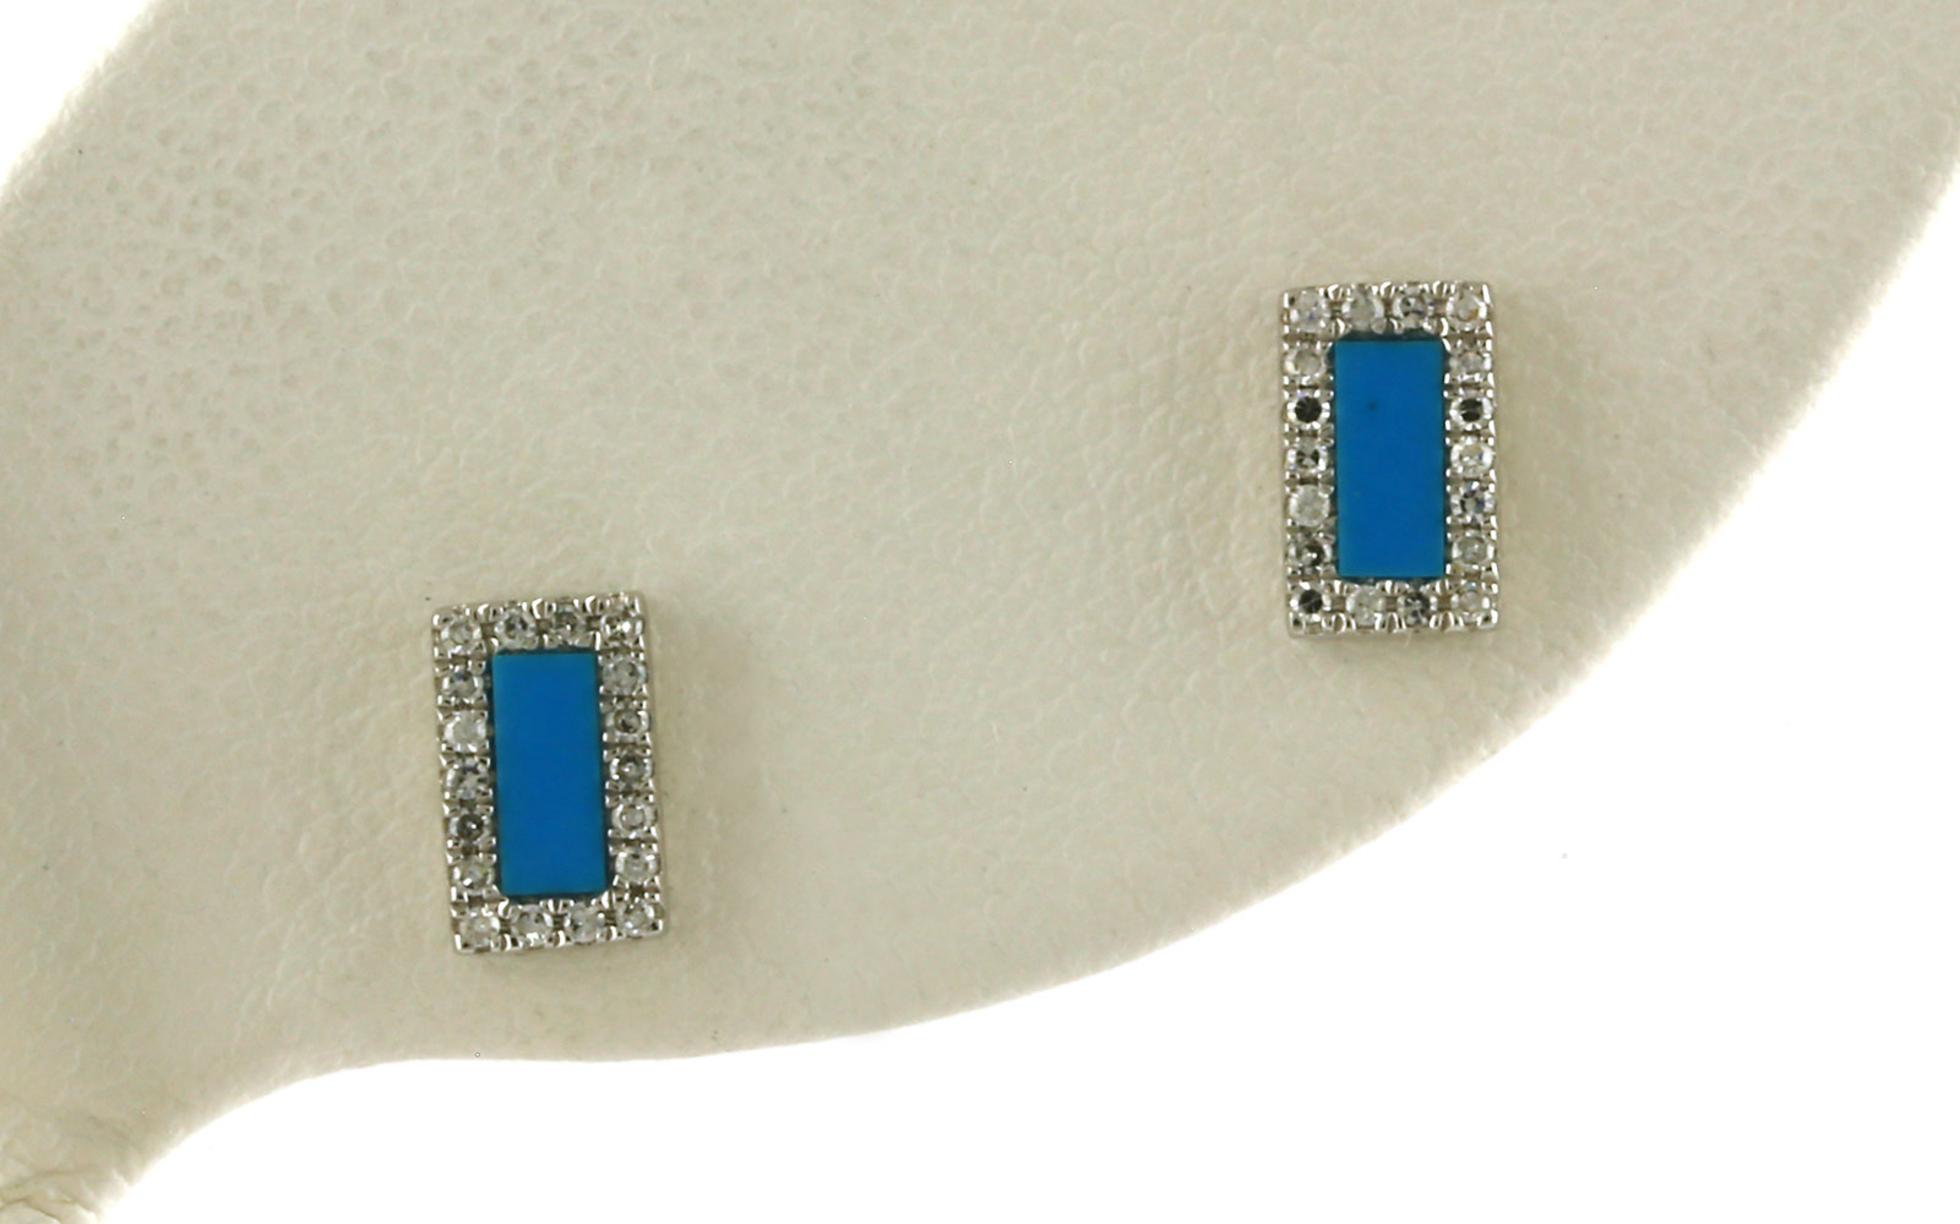 Rectangular Halo-style Turquoise and Diamond Stud Earrings in White Gold